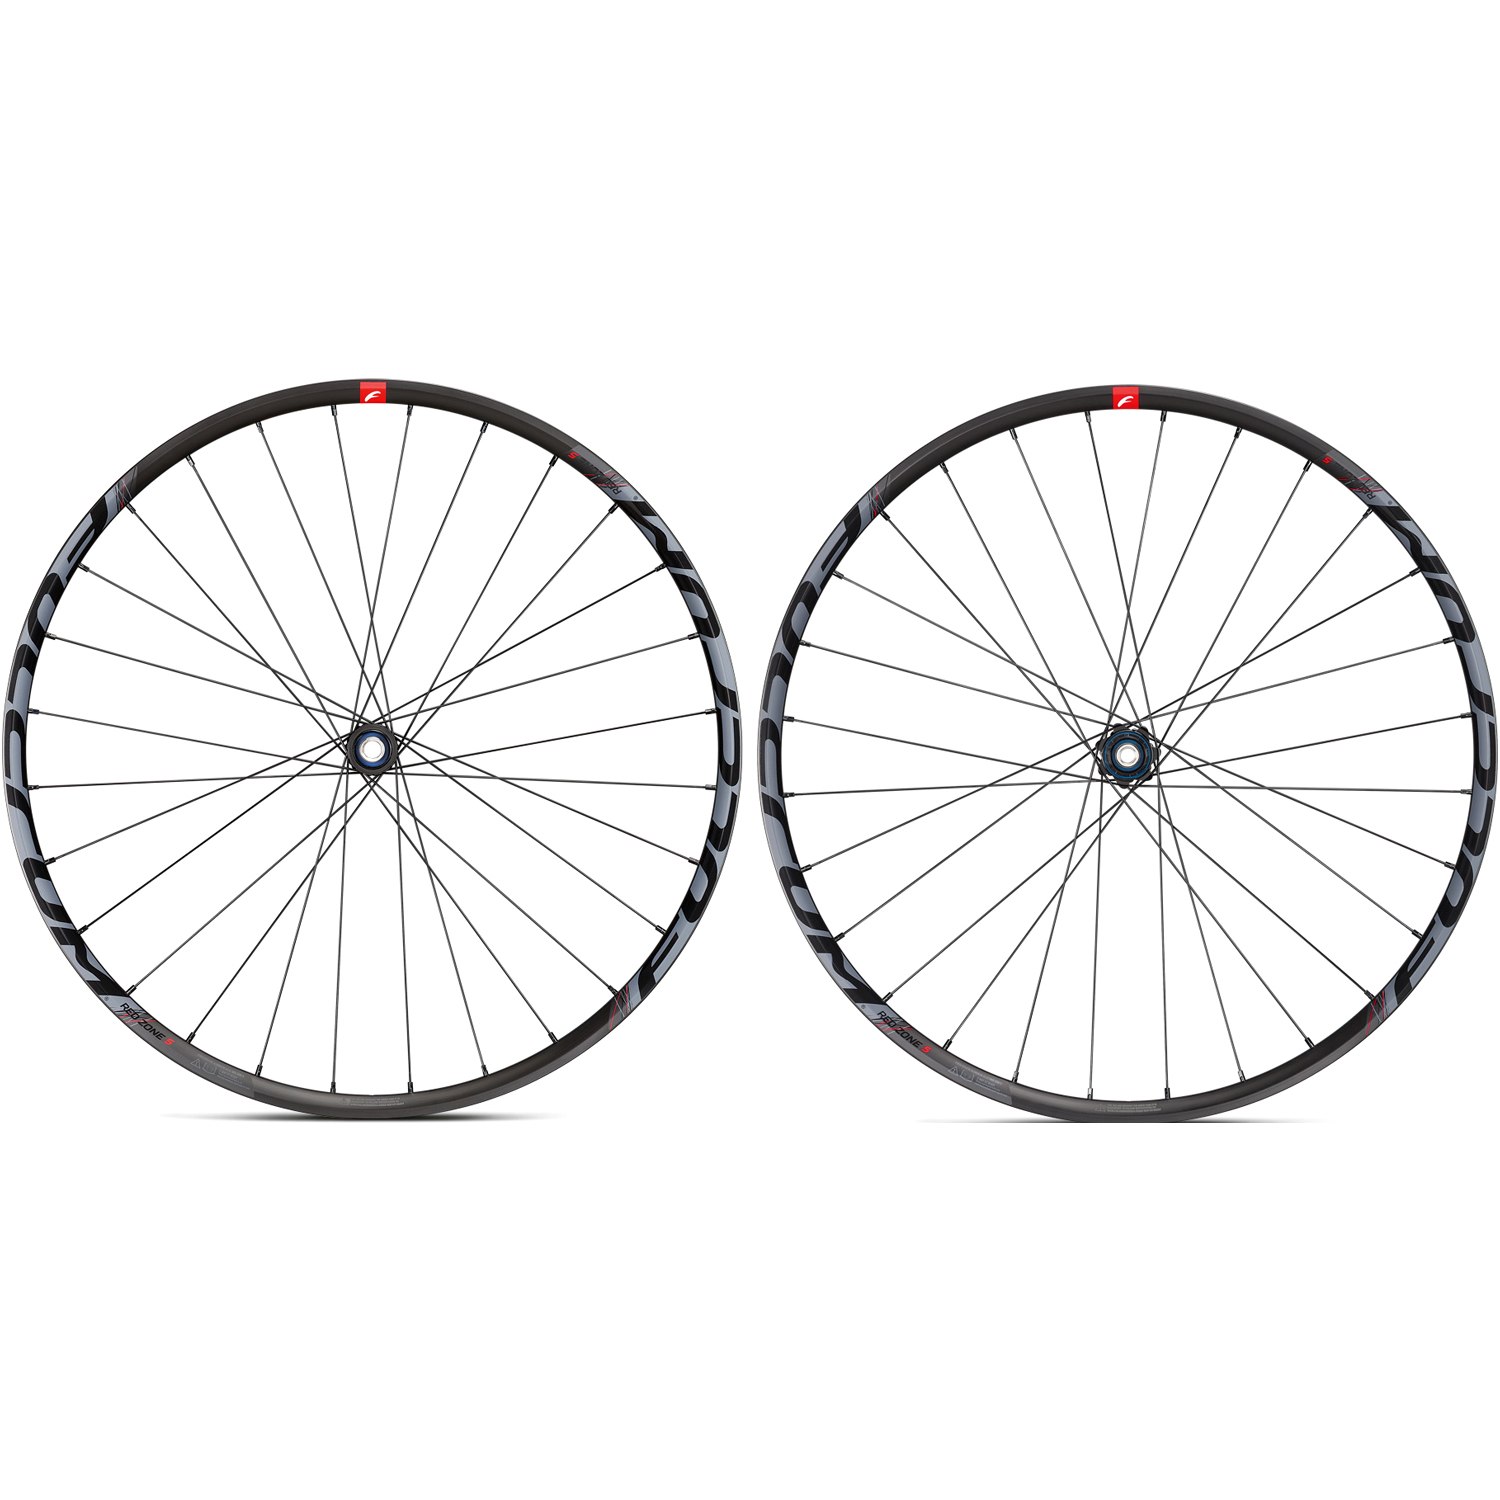 Image of Fulcrum Red Zone 5 27.5 Inches MTB Wheelset - Centerlock - FW: 15x110mm | RW: 12x/148mm Boost